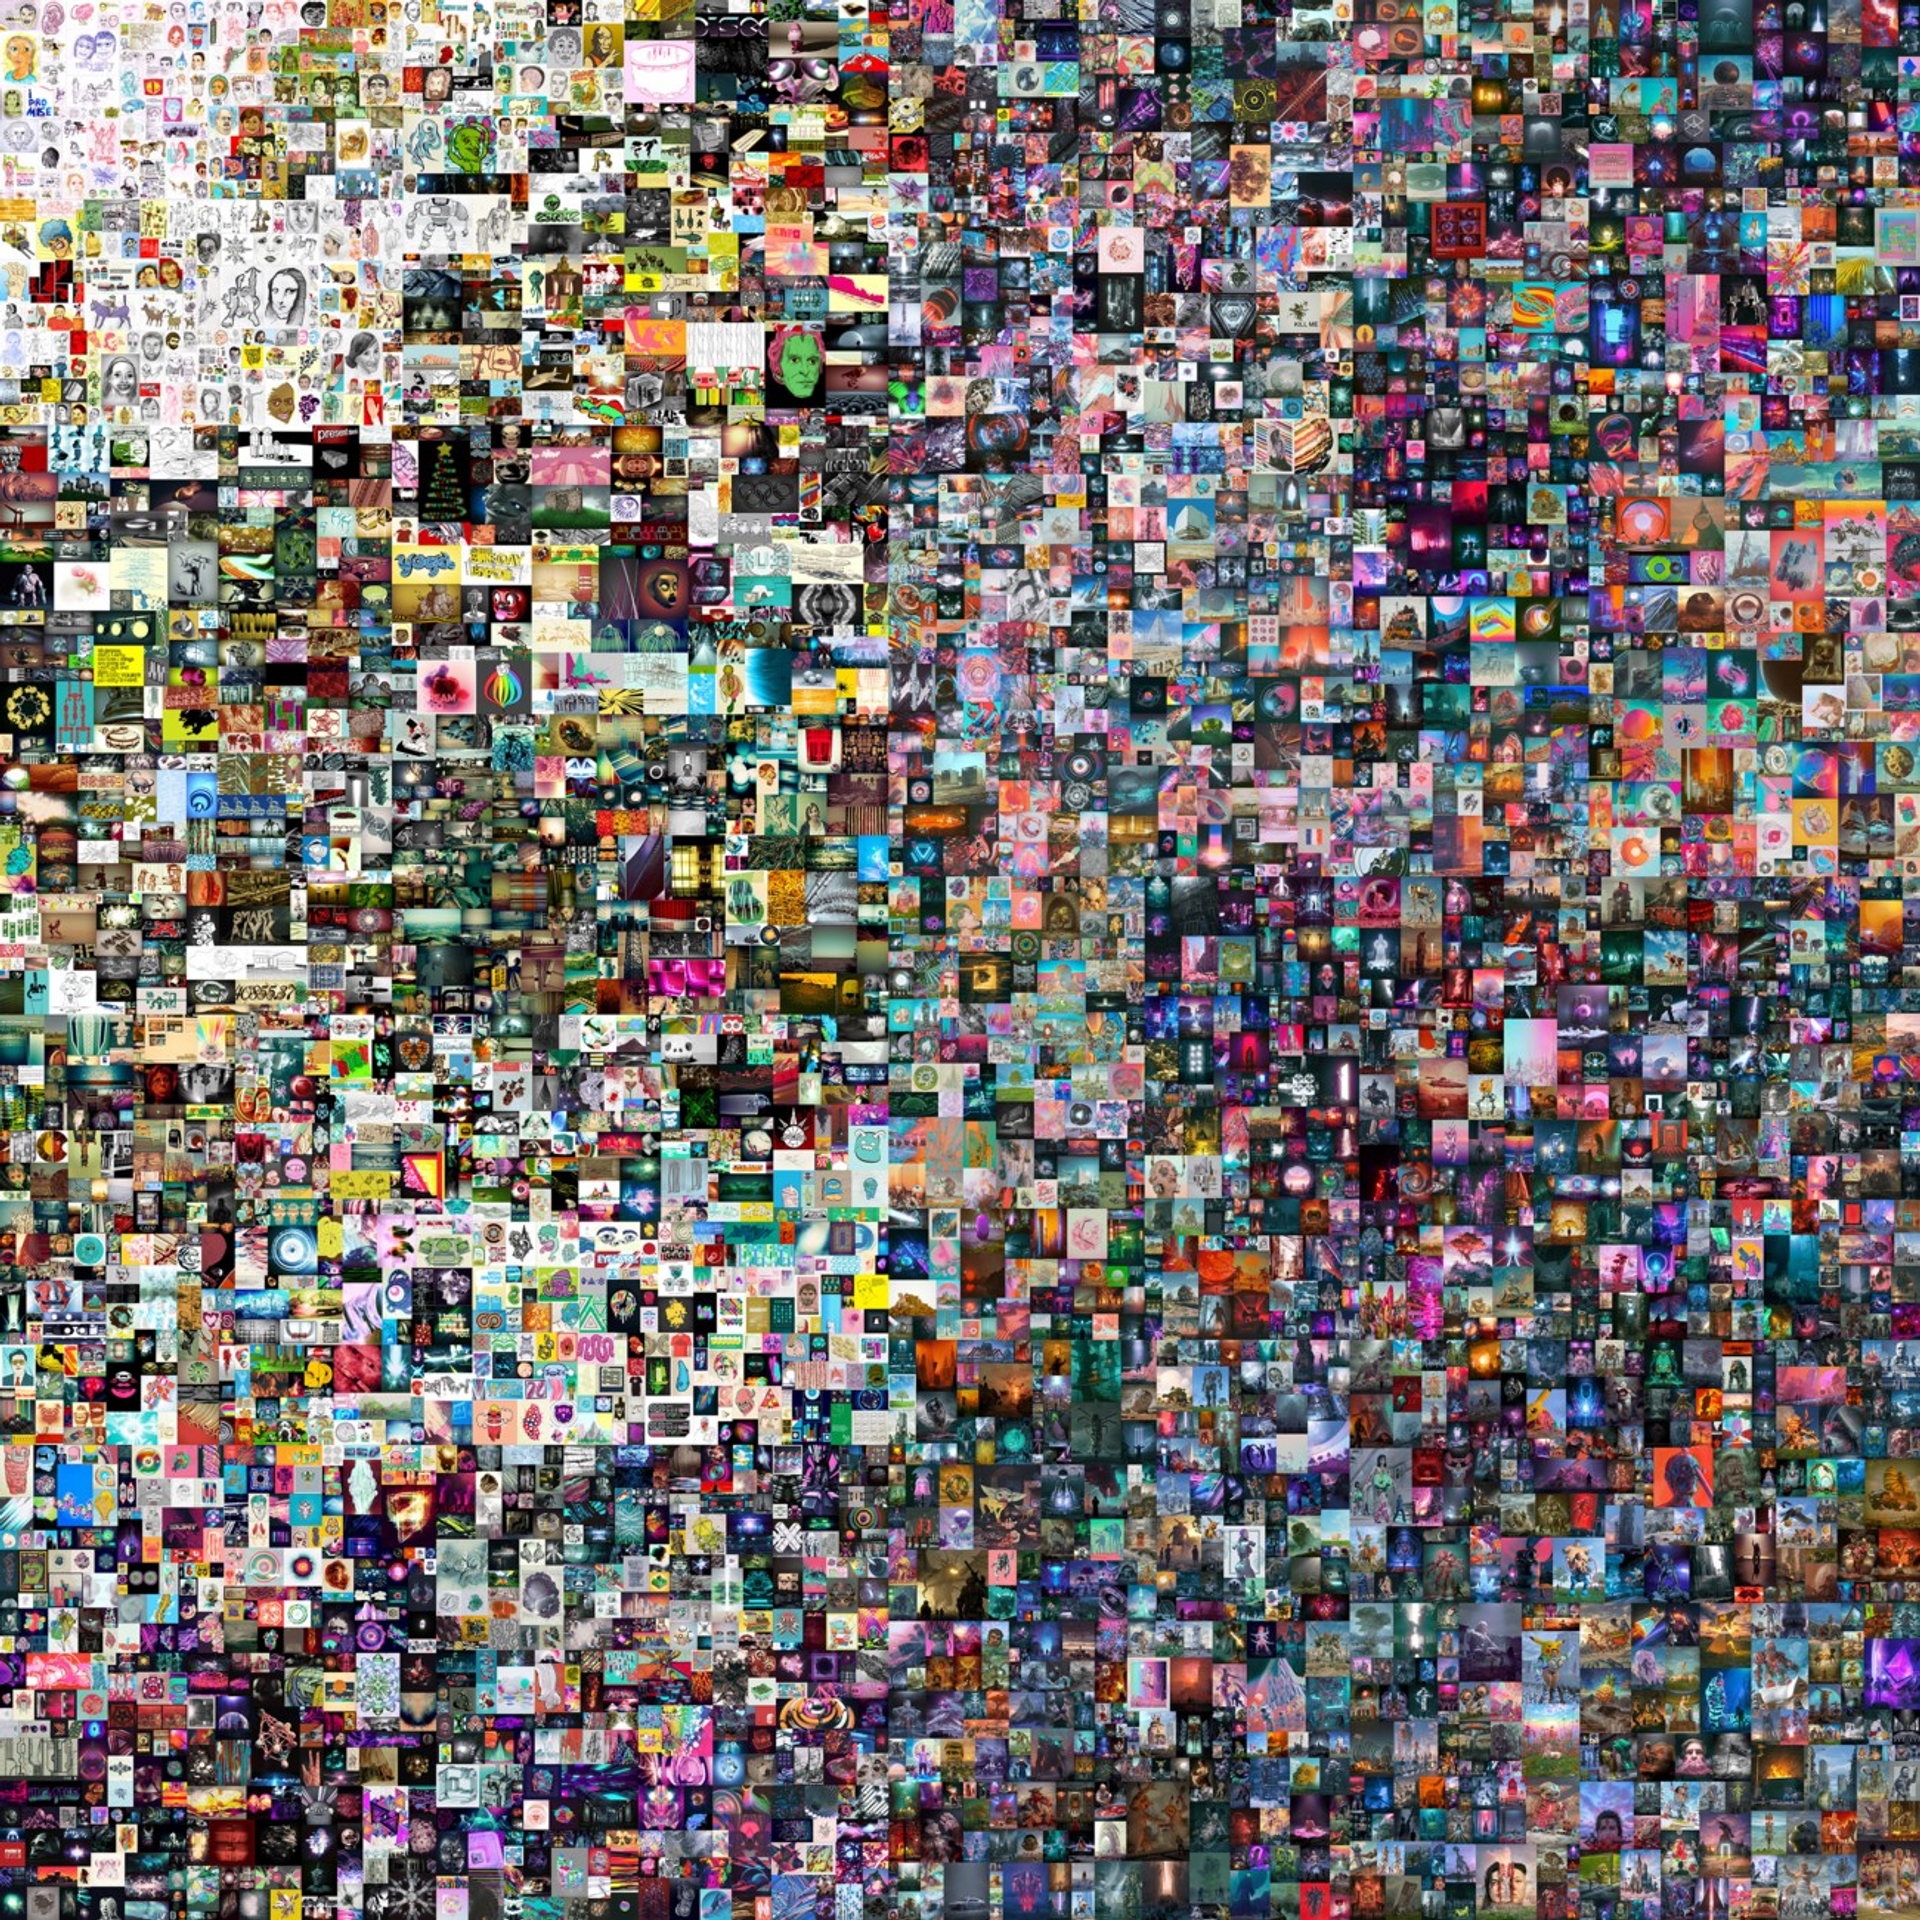 A digital collage of 5000 images featuring controversial, contemporary and pop culture graphics.